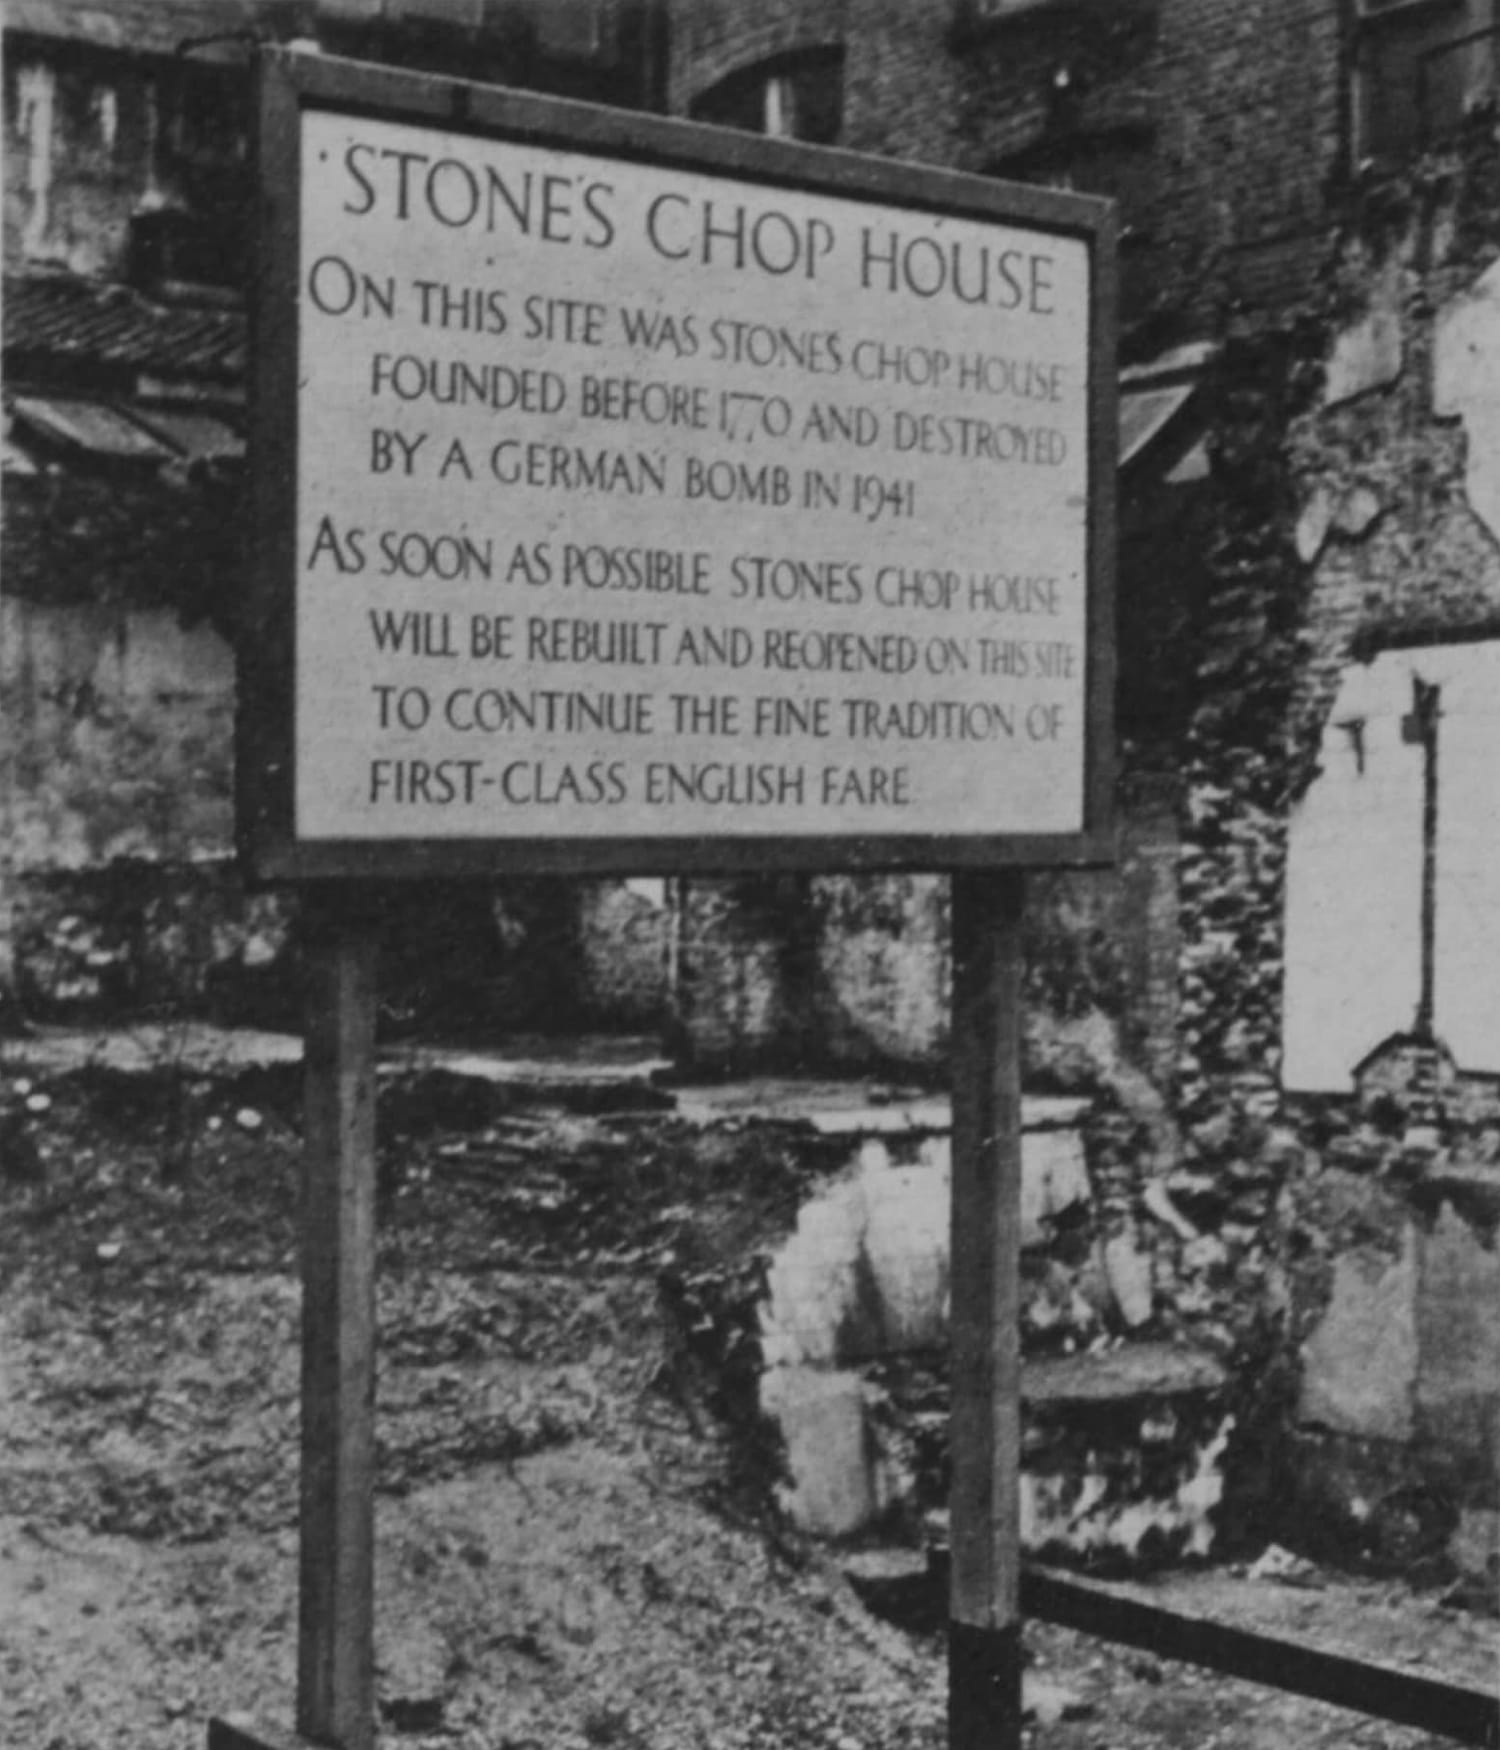 Hand-painted sign mounted to two wooden posts. It reads, ""Stones Chop House. On this site was Stones Chop House, founded before 1770 and destroyed by a German bomb in 1941. As soon as posible Stones Chop House will be rebuilt and reopened on this site to continue the fine tradition of first-class English fare."